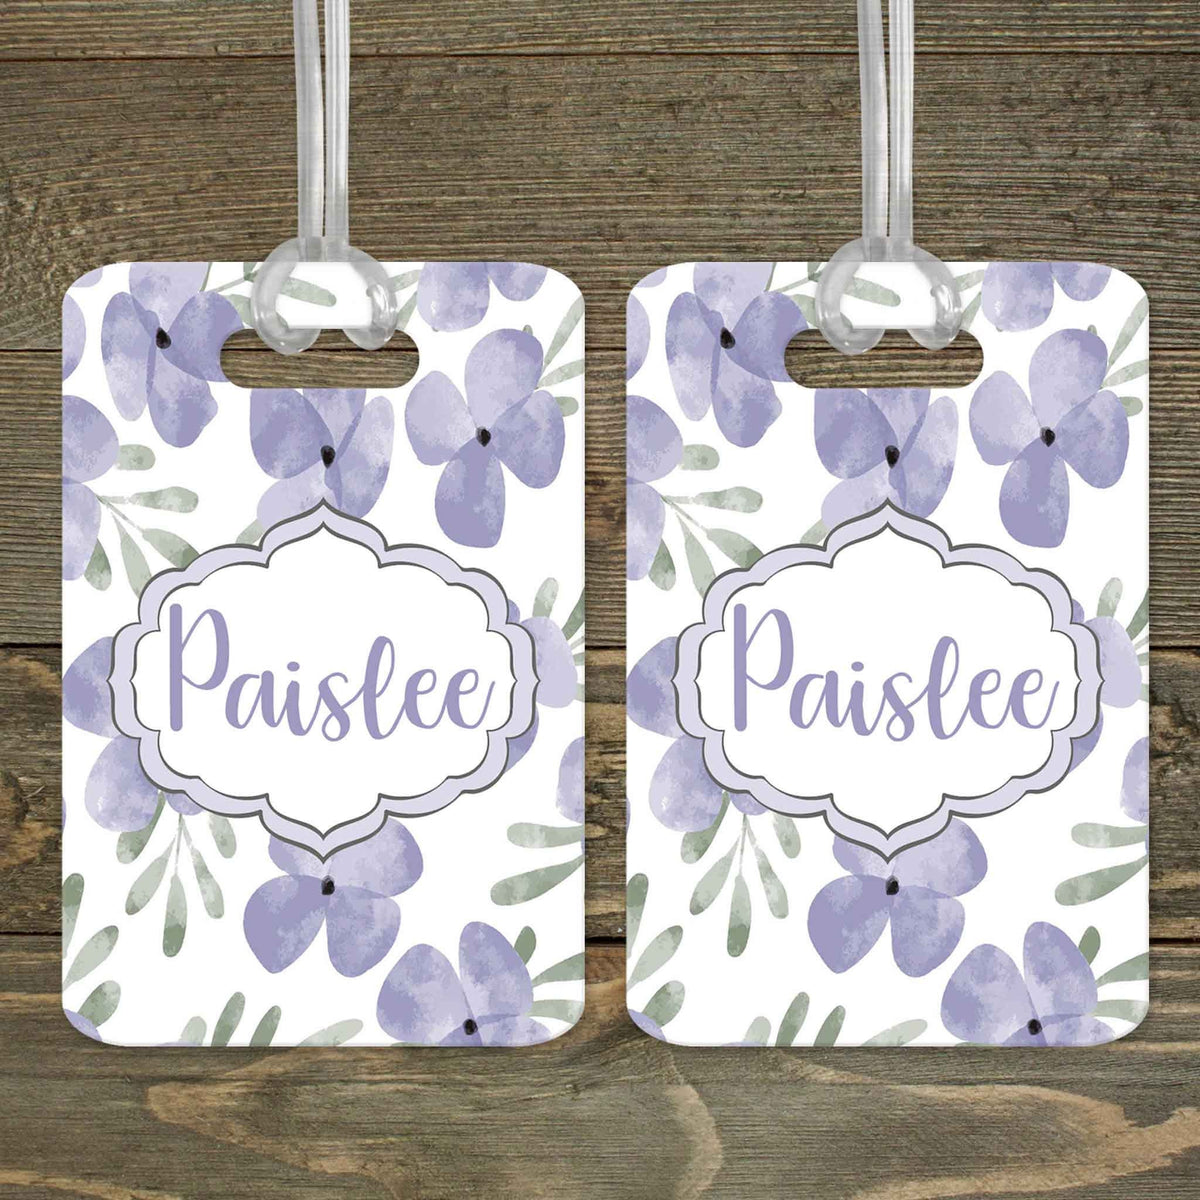 This &amp; That Solutions - Personalized Luggage Tag | Custom Monogram Bag Tag | Periwinkle - Personalized Gifts &amp; Custom Home Decor